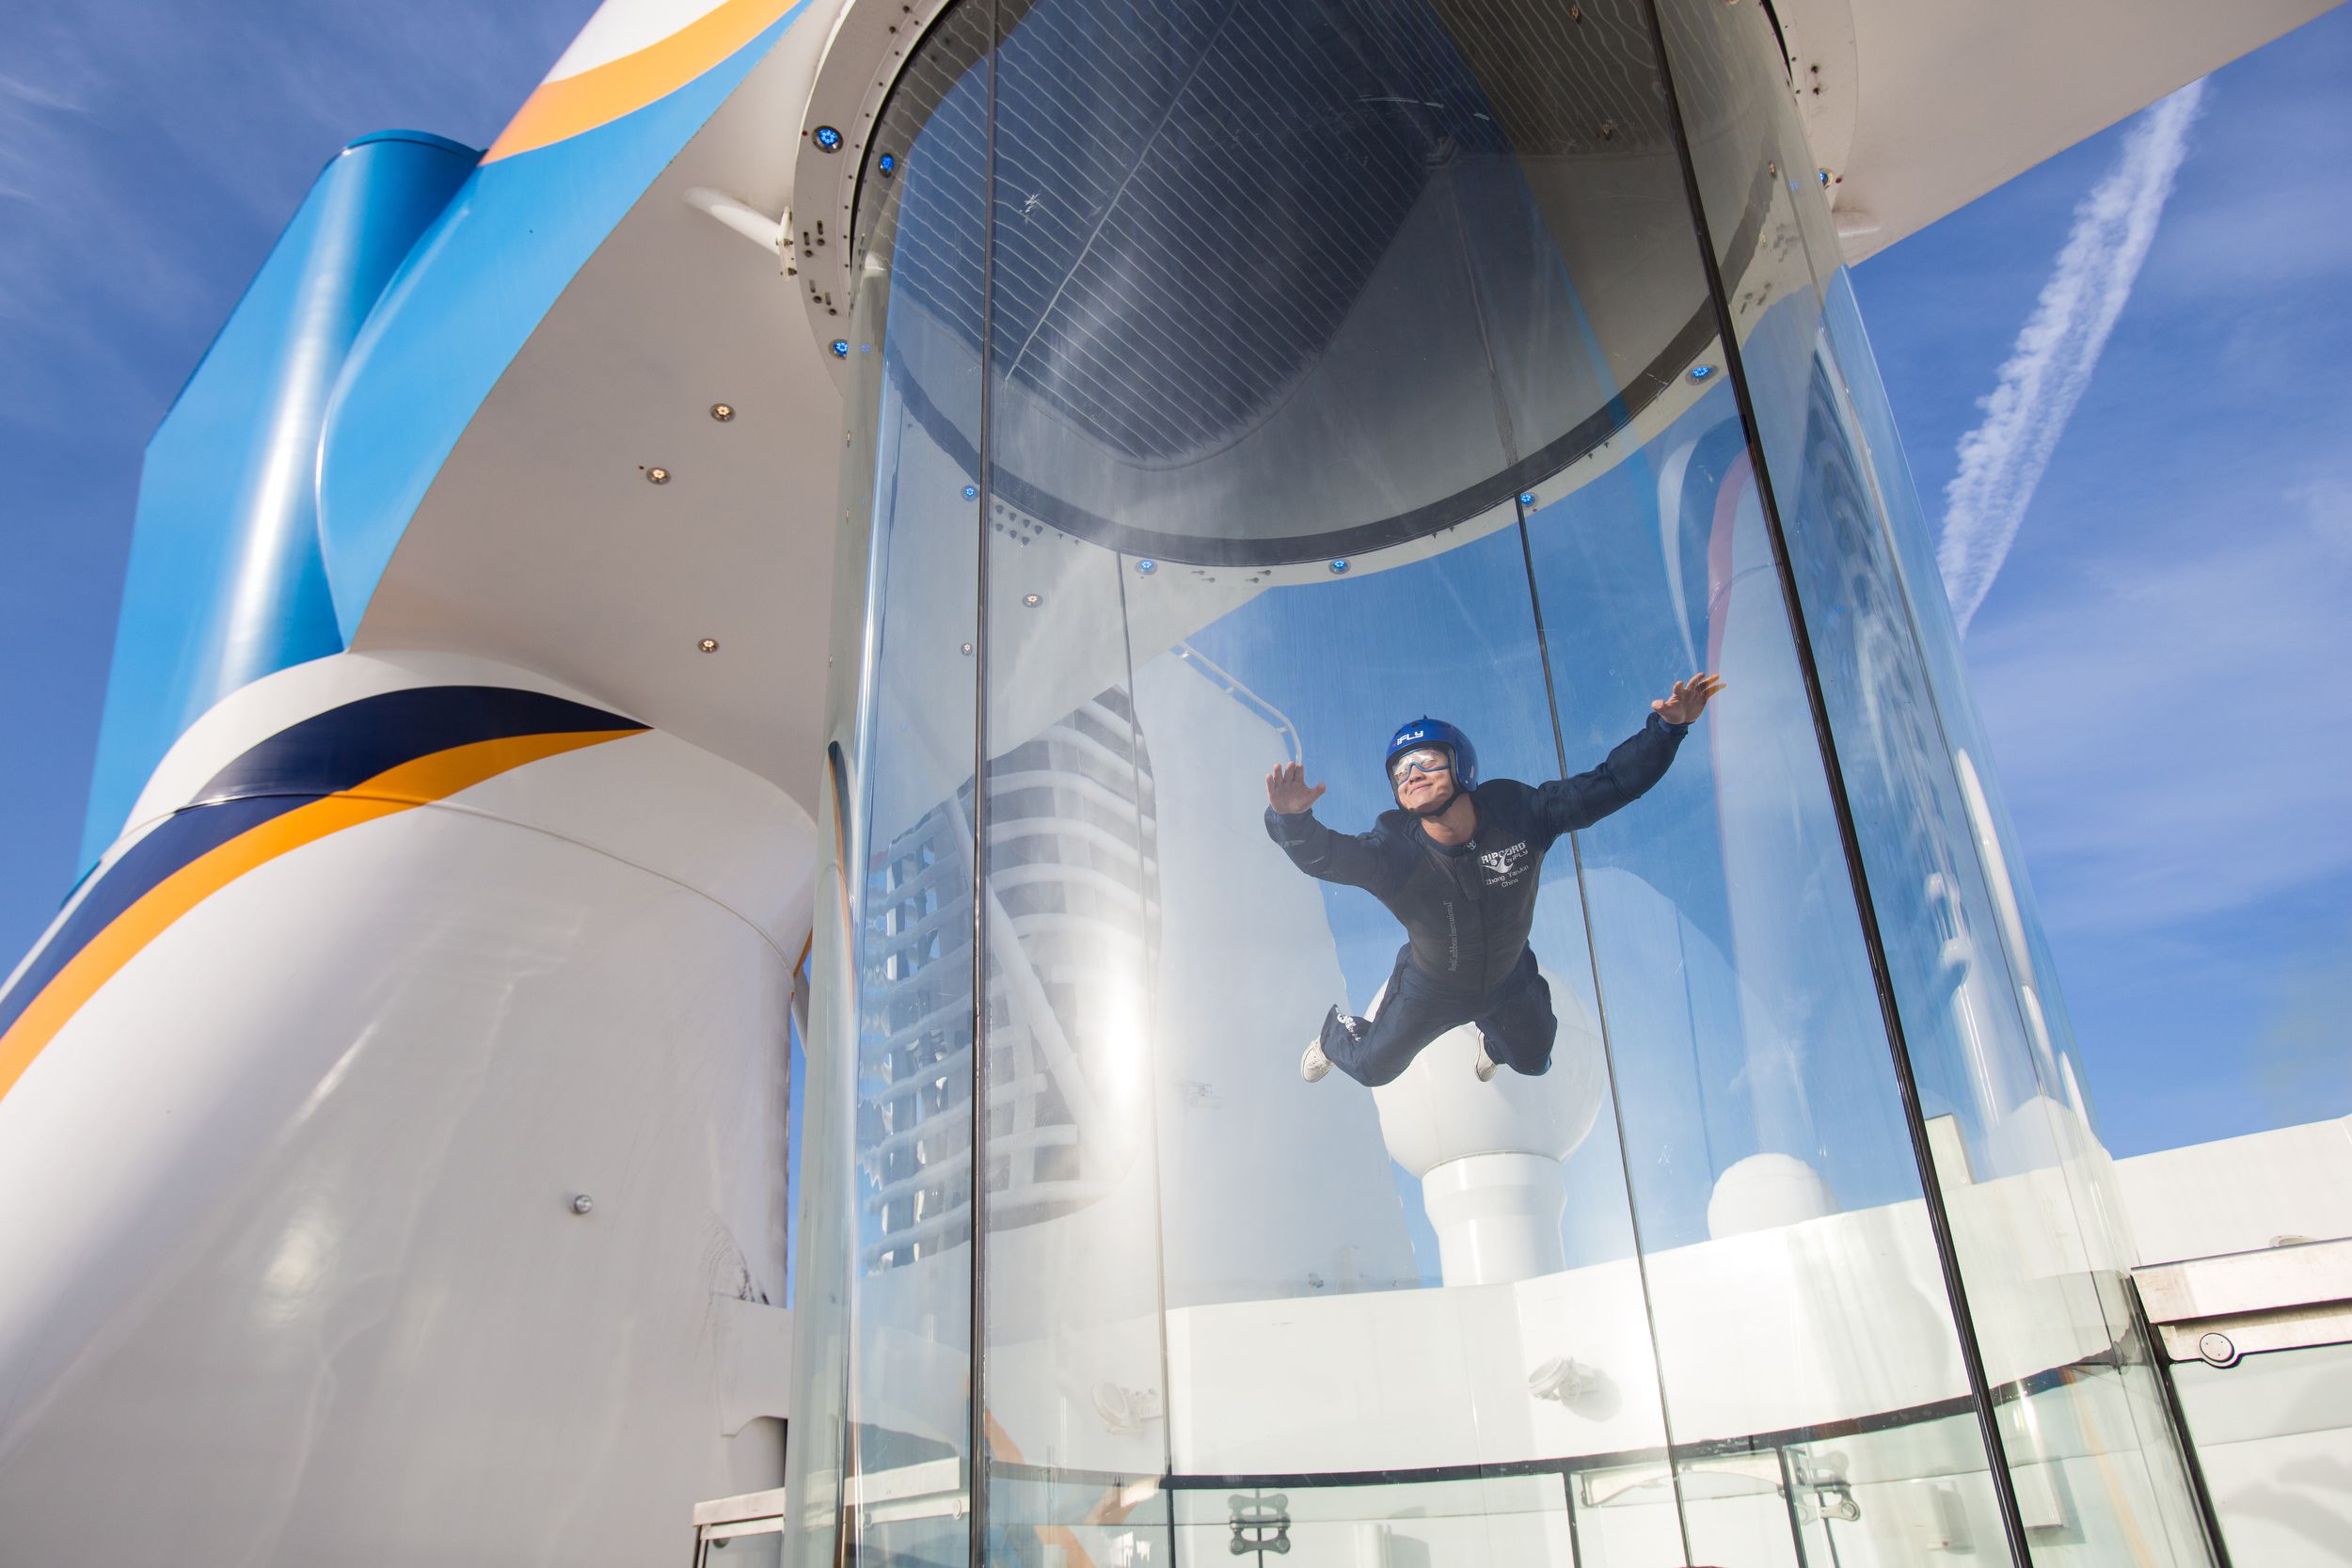 Instructor floating in the air, Ripcord by iFly activity